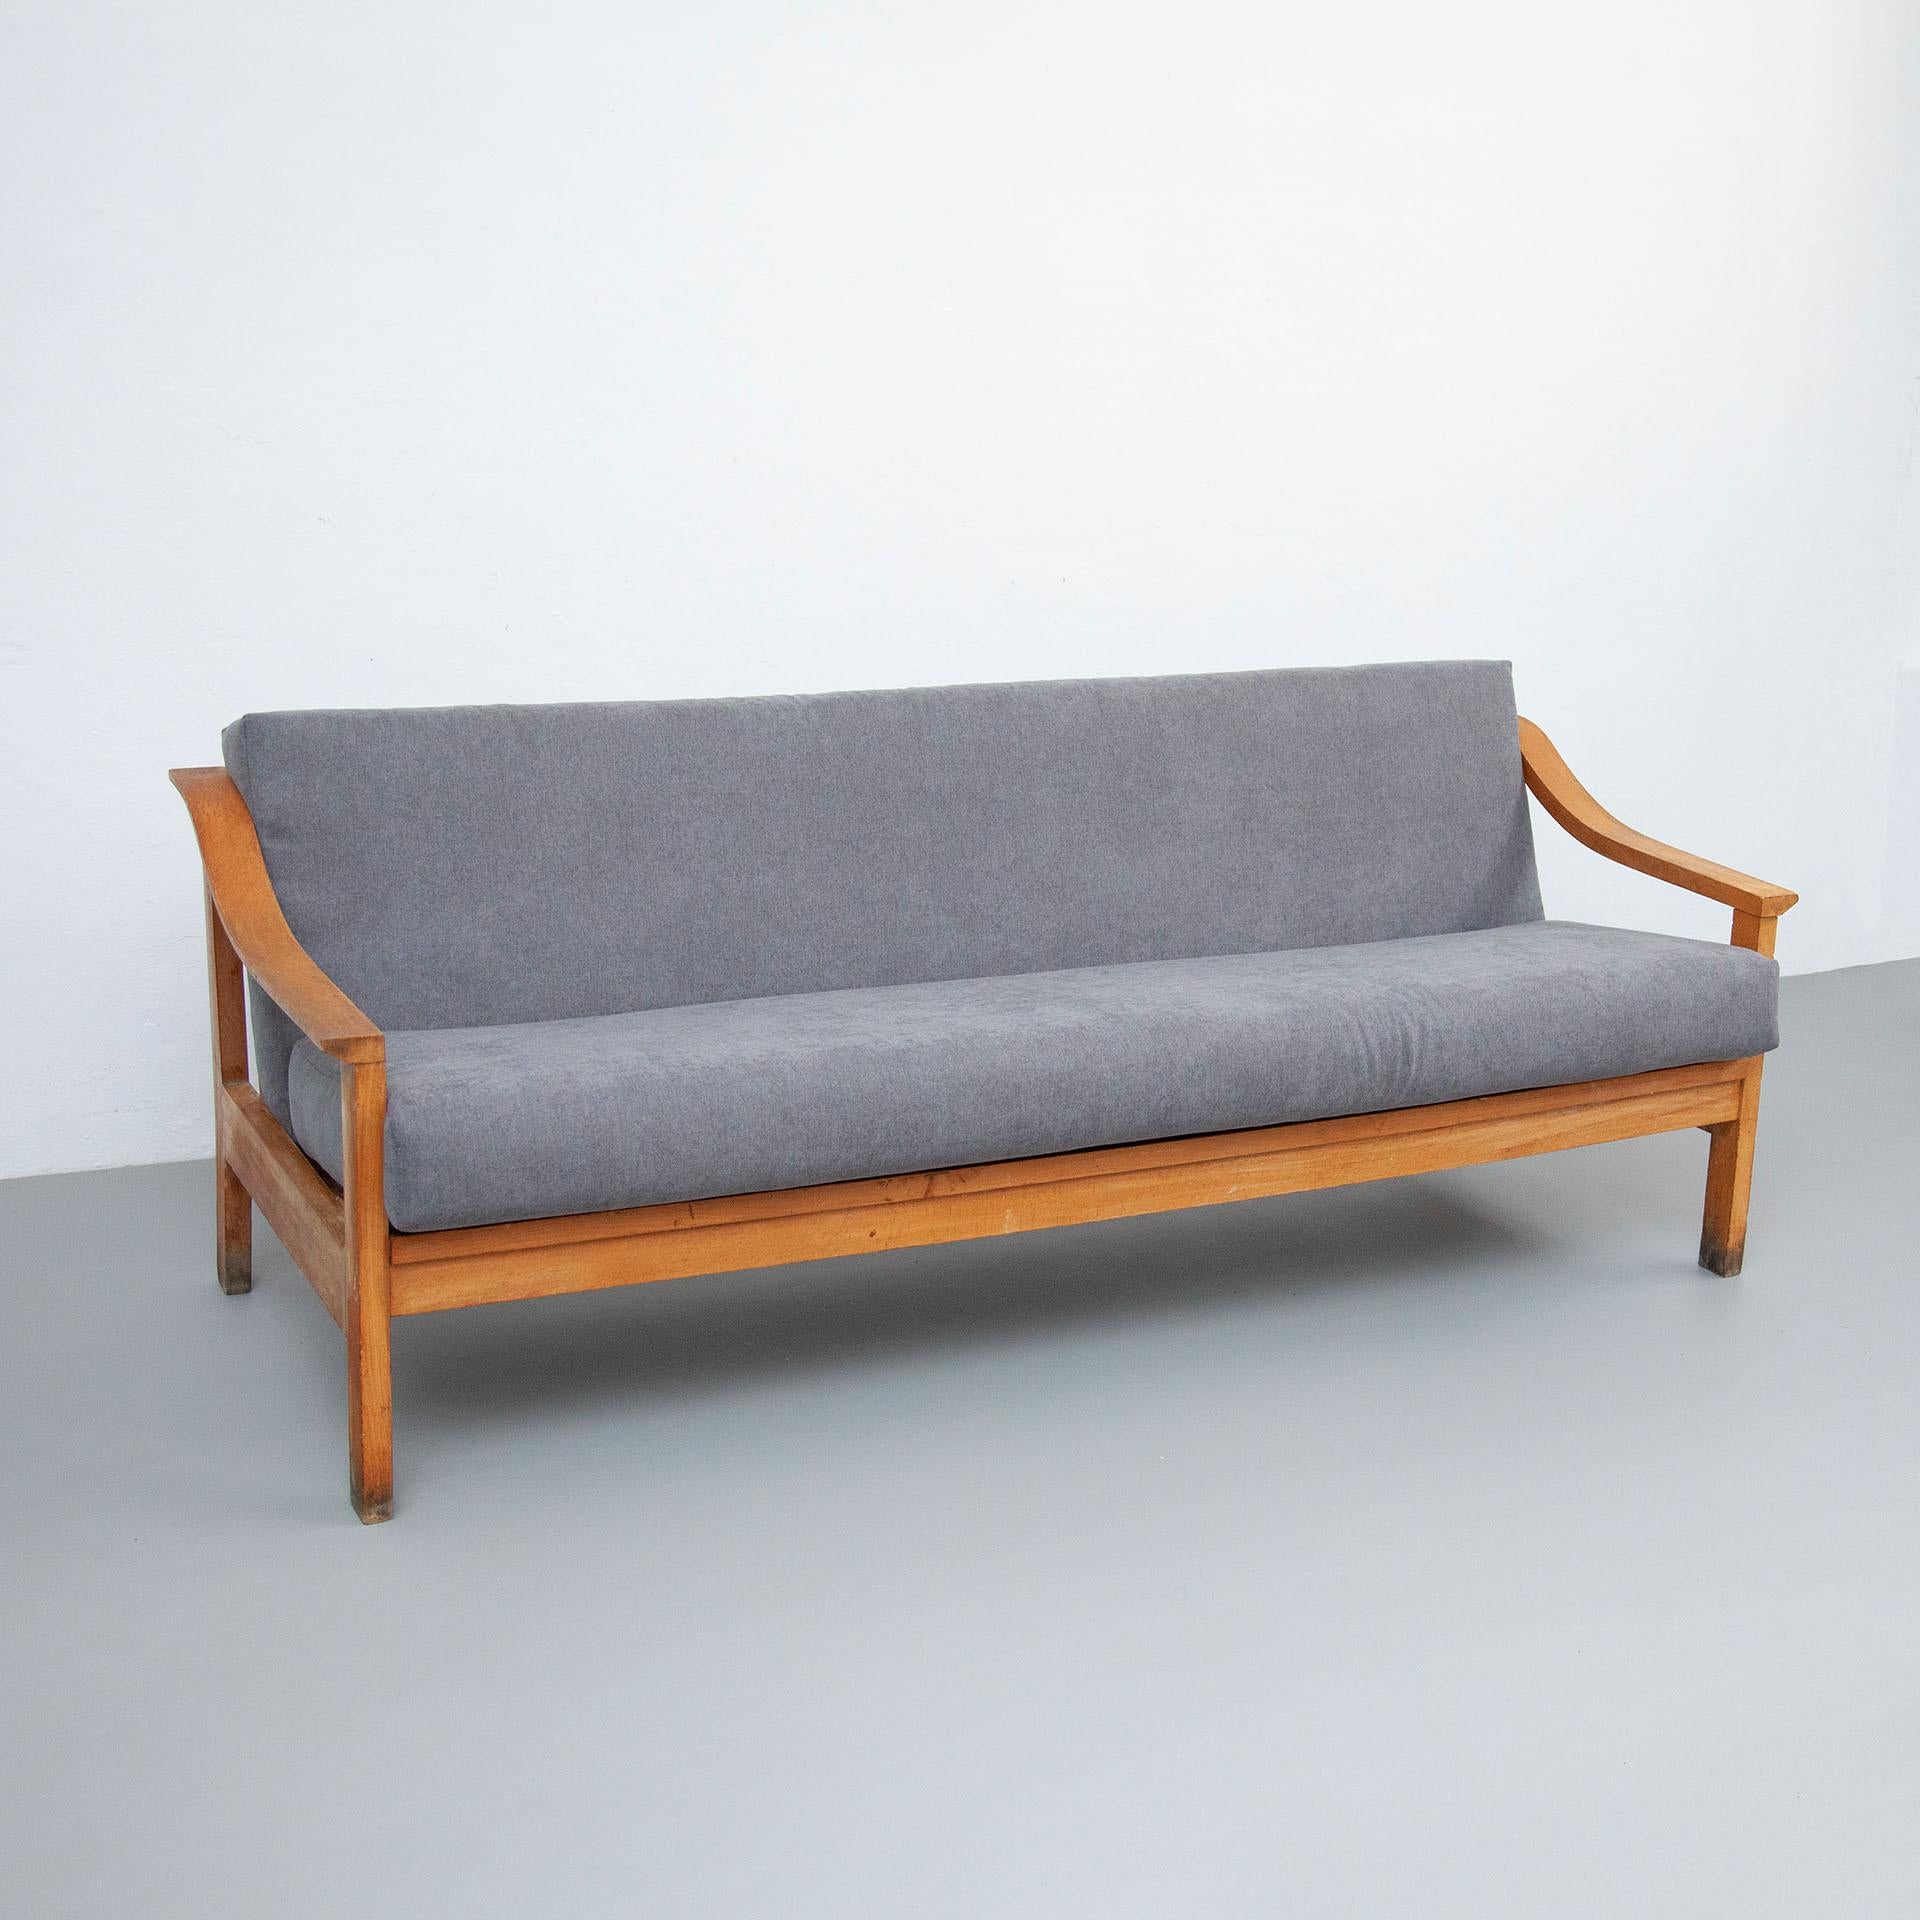 Mid-Century Modern wood Scandinavian sofa, circa 1950.
With a new upholstery.

In original condition, preserving a beautiful patina, with minor wear consistent with age and use. 

Materials:
Wood
Fabric

Dimensions:
D 71 cm x W 117 cm x H